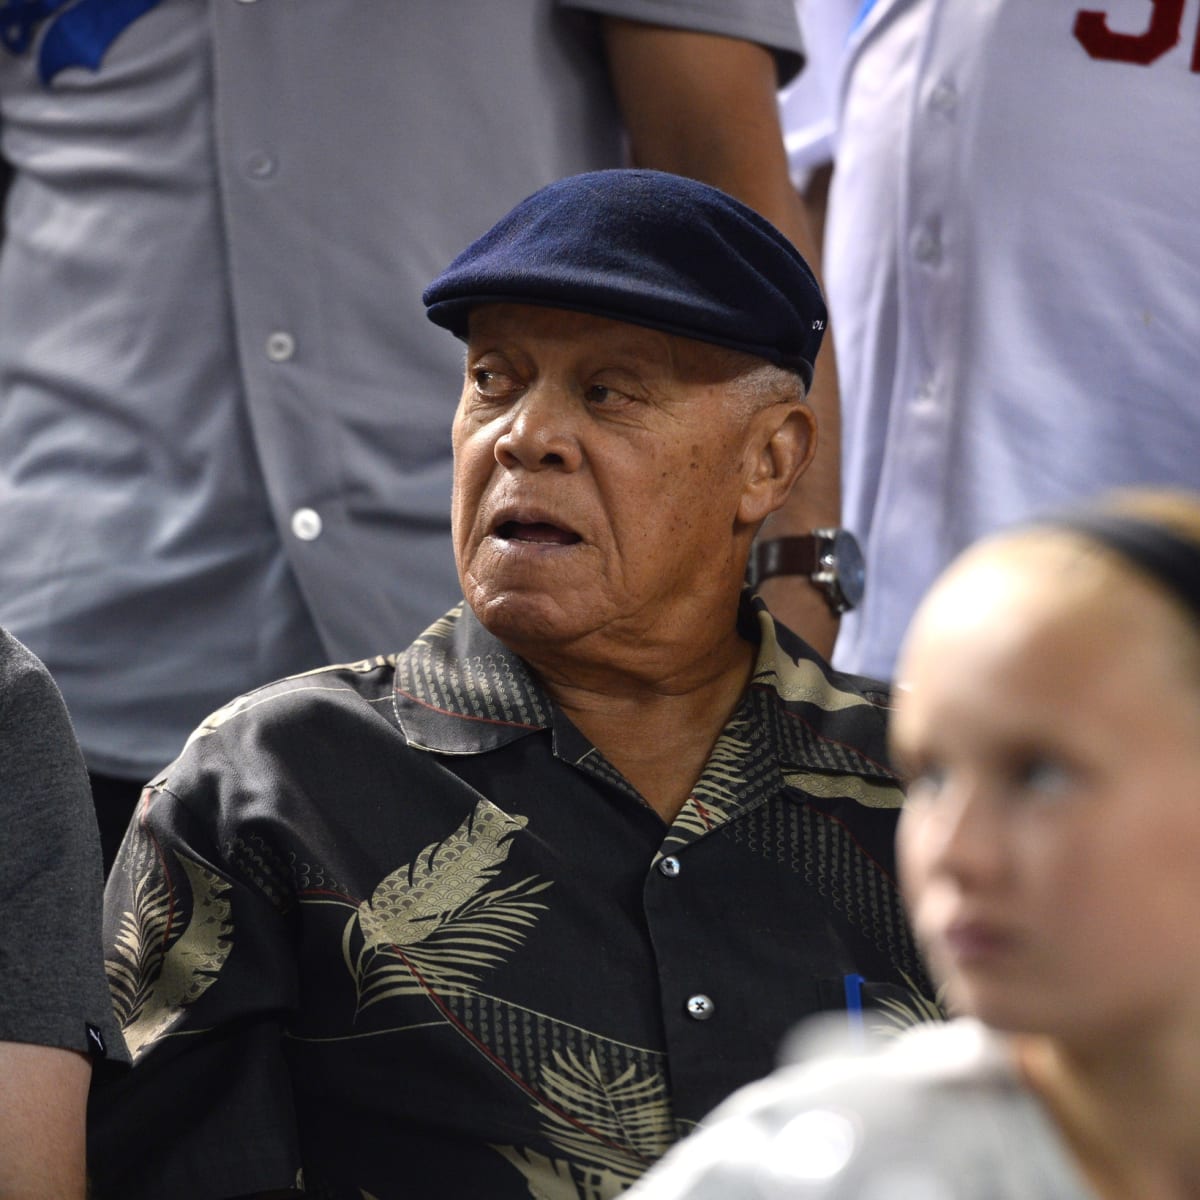 Interview: Maury Wills Looks Back on Dodgers Career - Inside the Dodgers